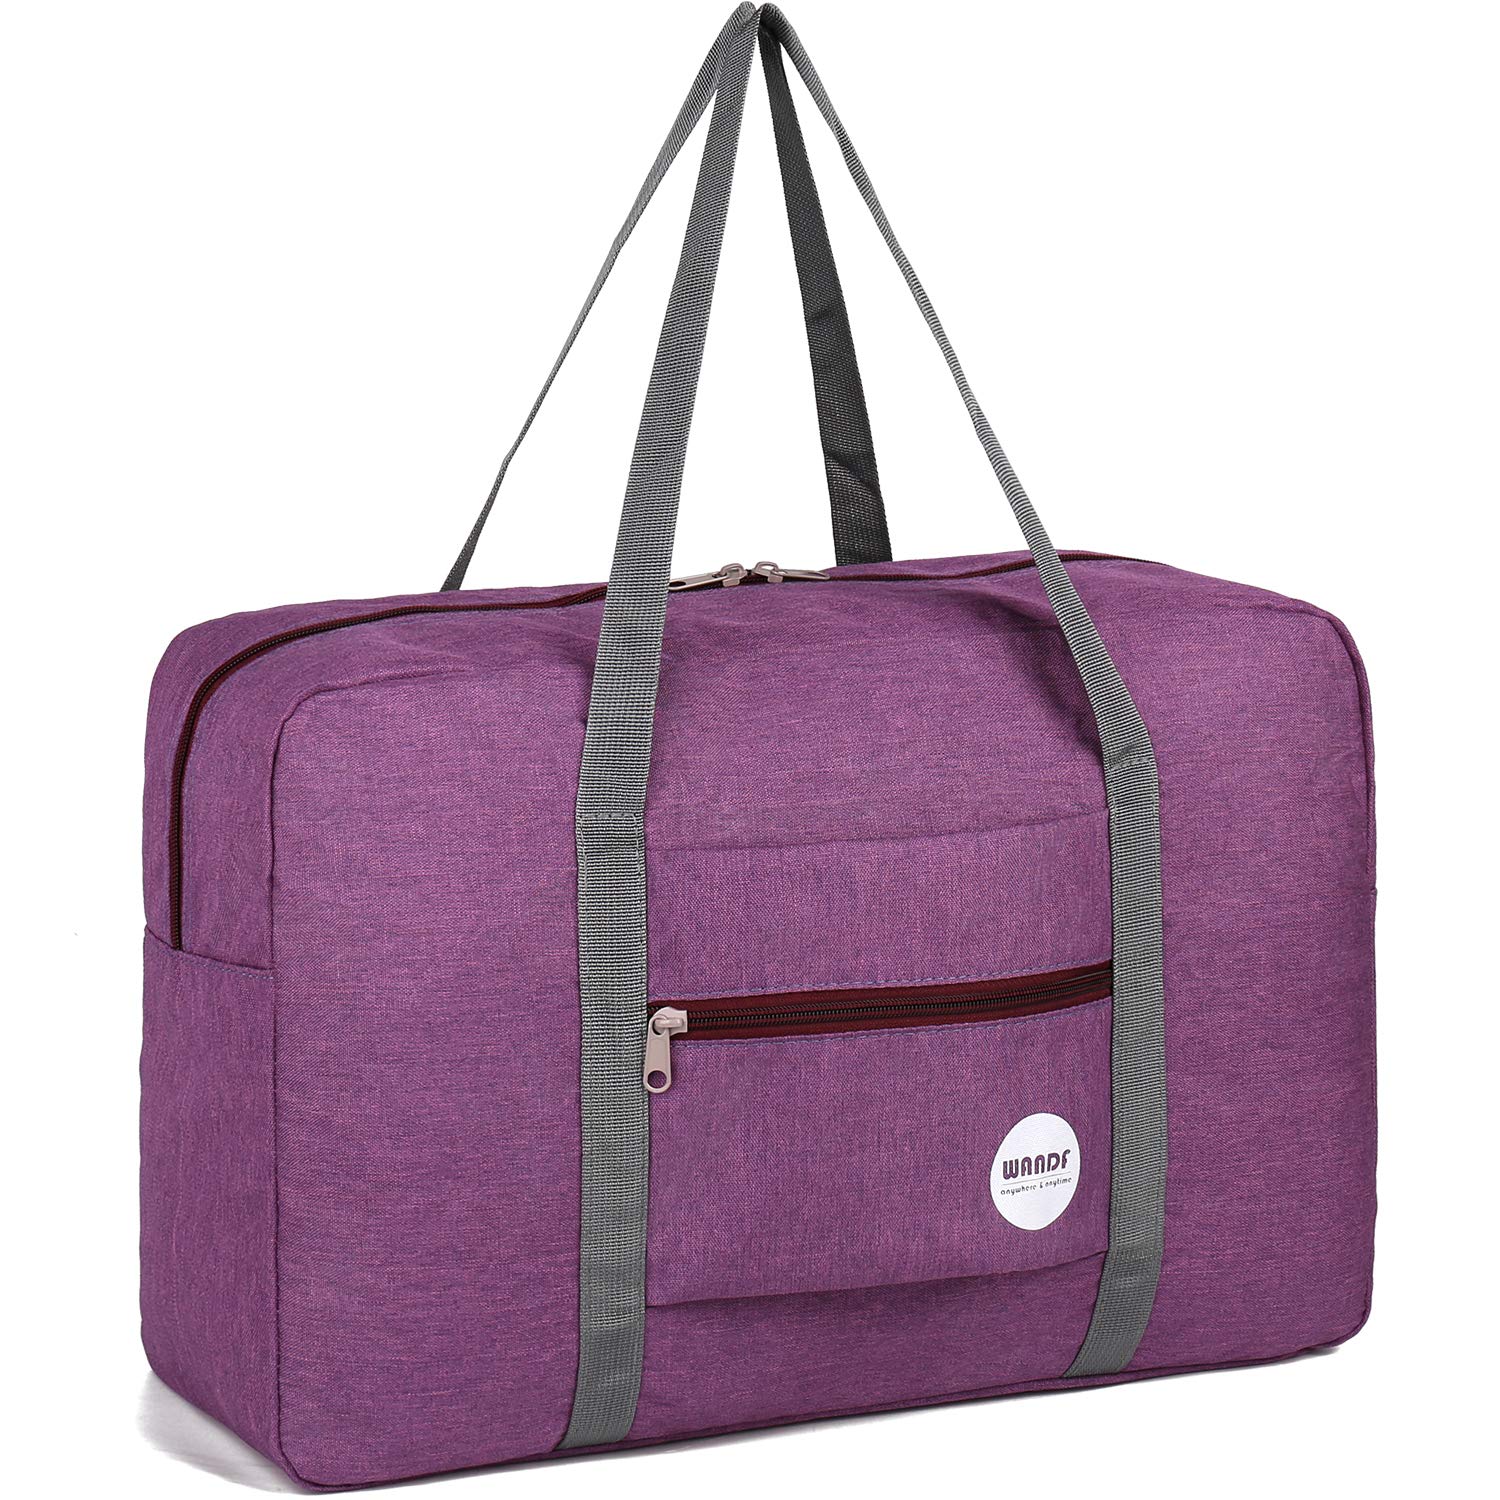 This Travel Tote Is an Extra 40% Off